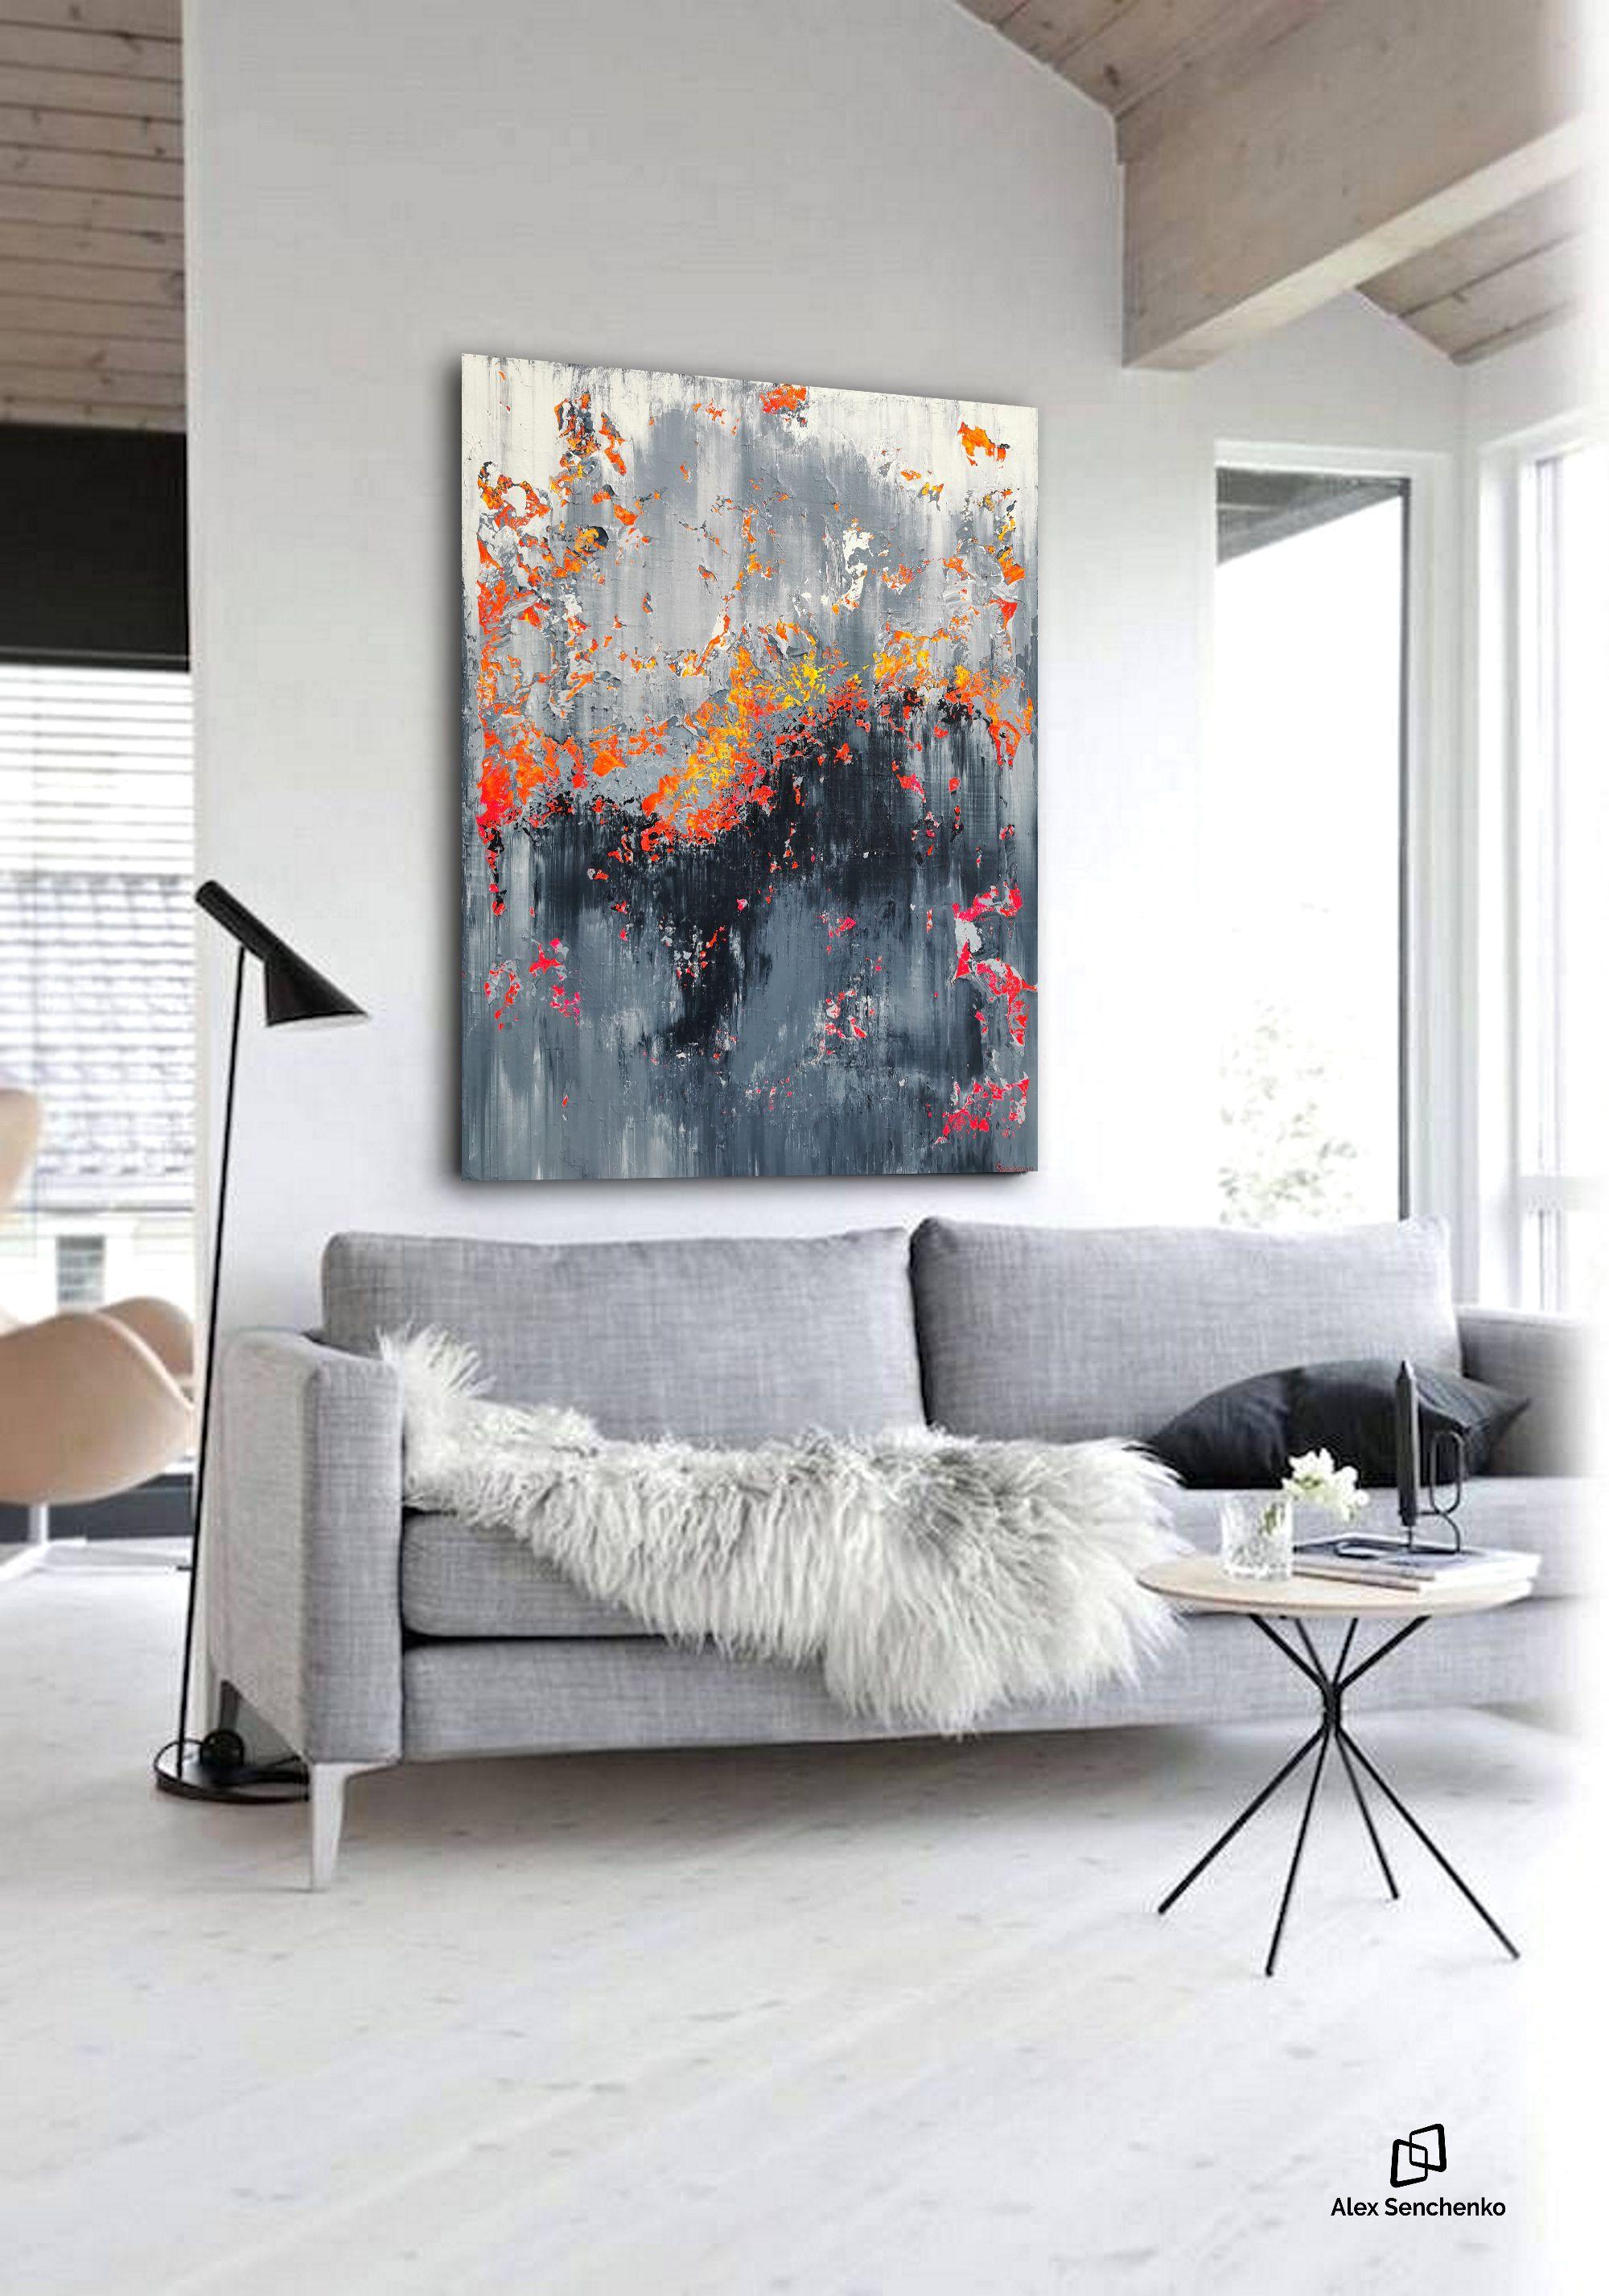 Thereâ€™s something different about the homes of creative people. They like to surround themselves with inspiring things, from unique tablecloths to the incredible paintings on the walls. Alex Senchenkoâ€™s - Abstract 2101 - can give your home that